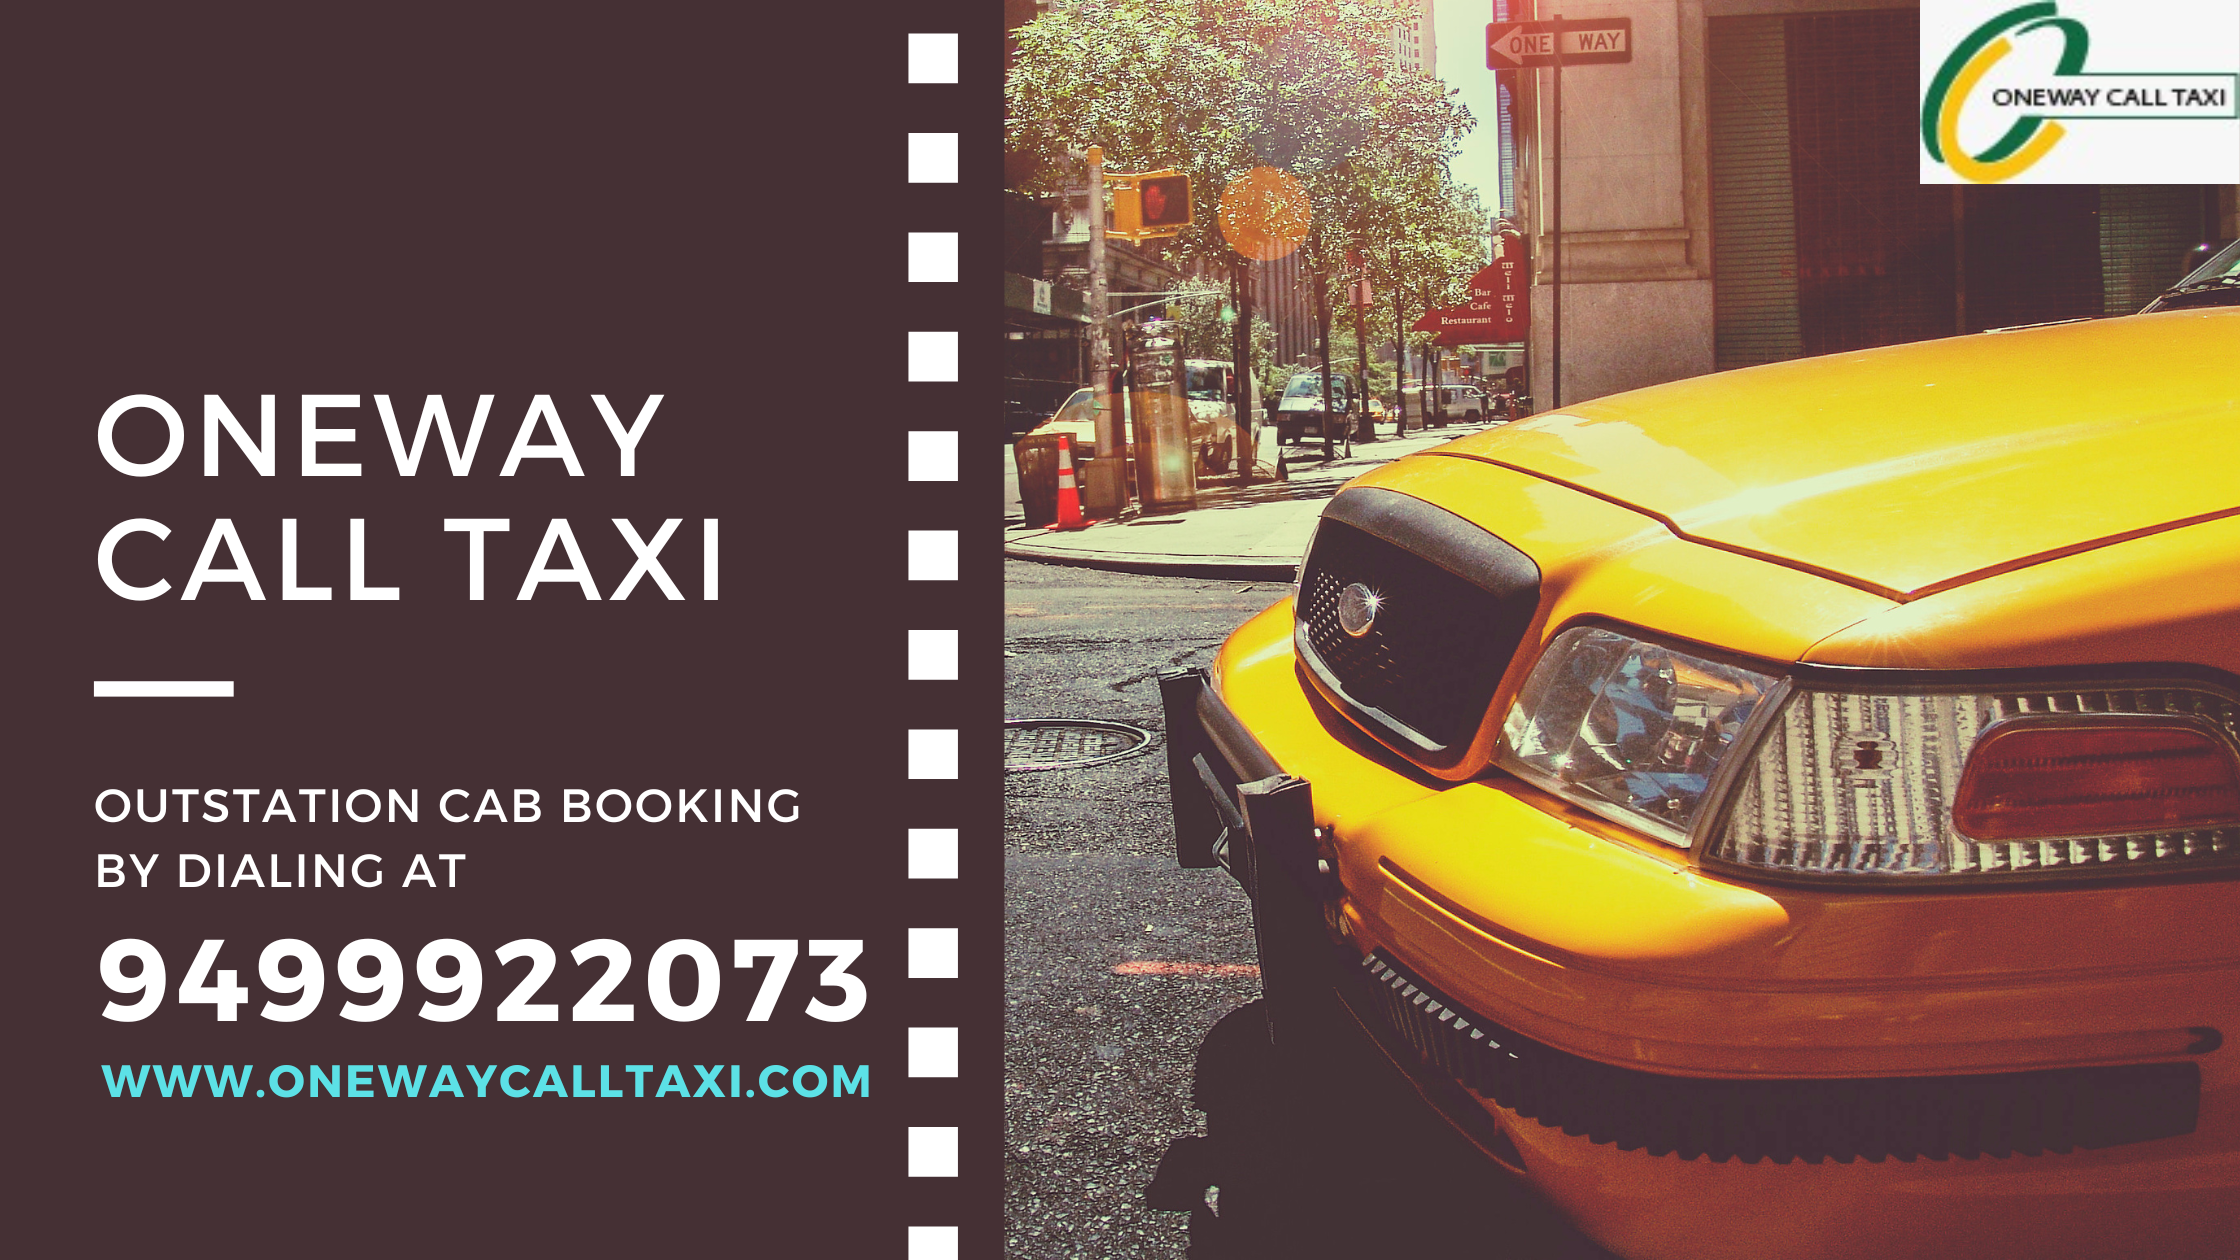 The need to select the best rental car service for a drop taxi ride.